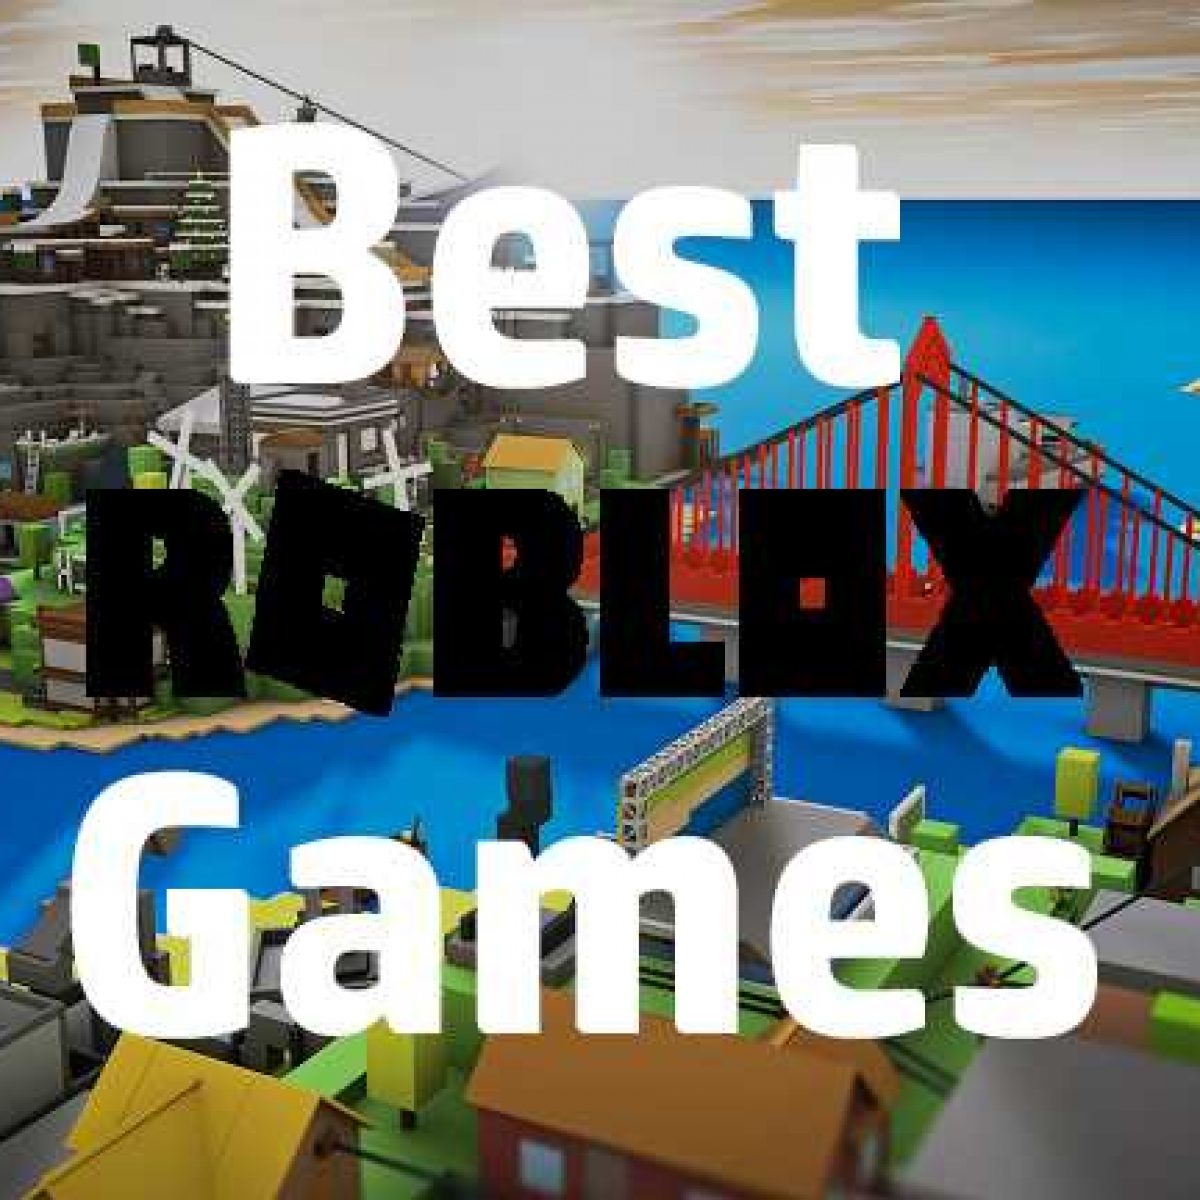 15 Best Roblox Games To Play In 2020 Must Play - roblox vehicle simulator codes list december 2019